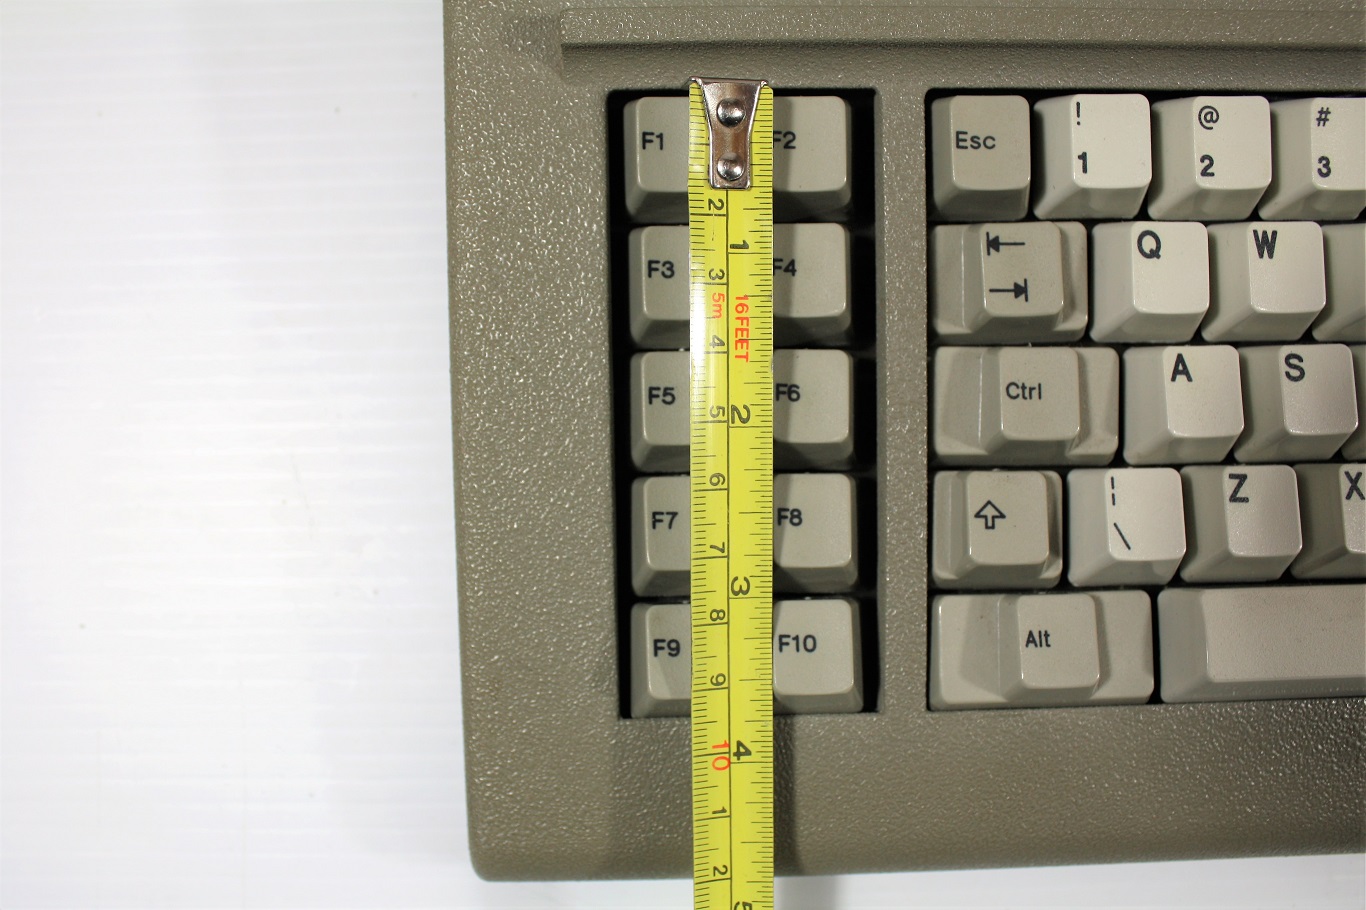 Measurements of the Industrial XT opening is about 3.75 inches or about 9.5 cm and makes the bottom row bind.